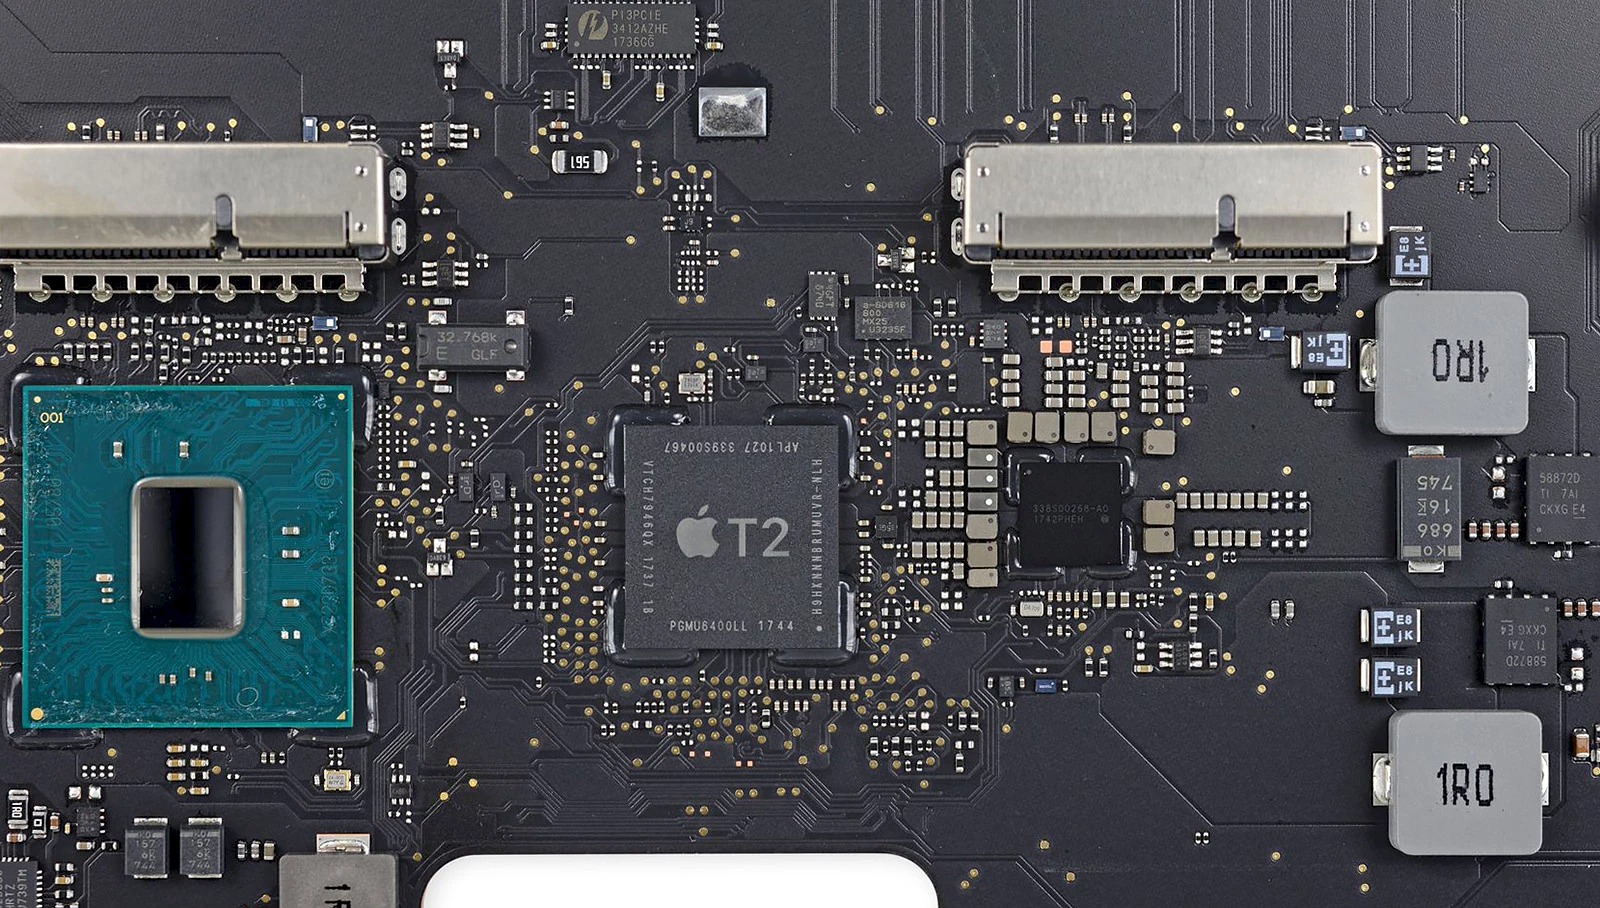 Apple’s T2 security chip.